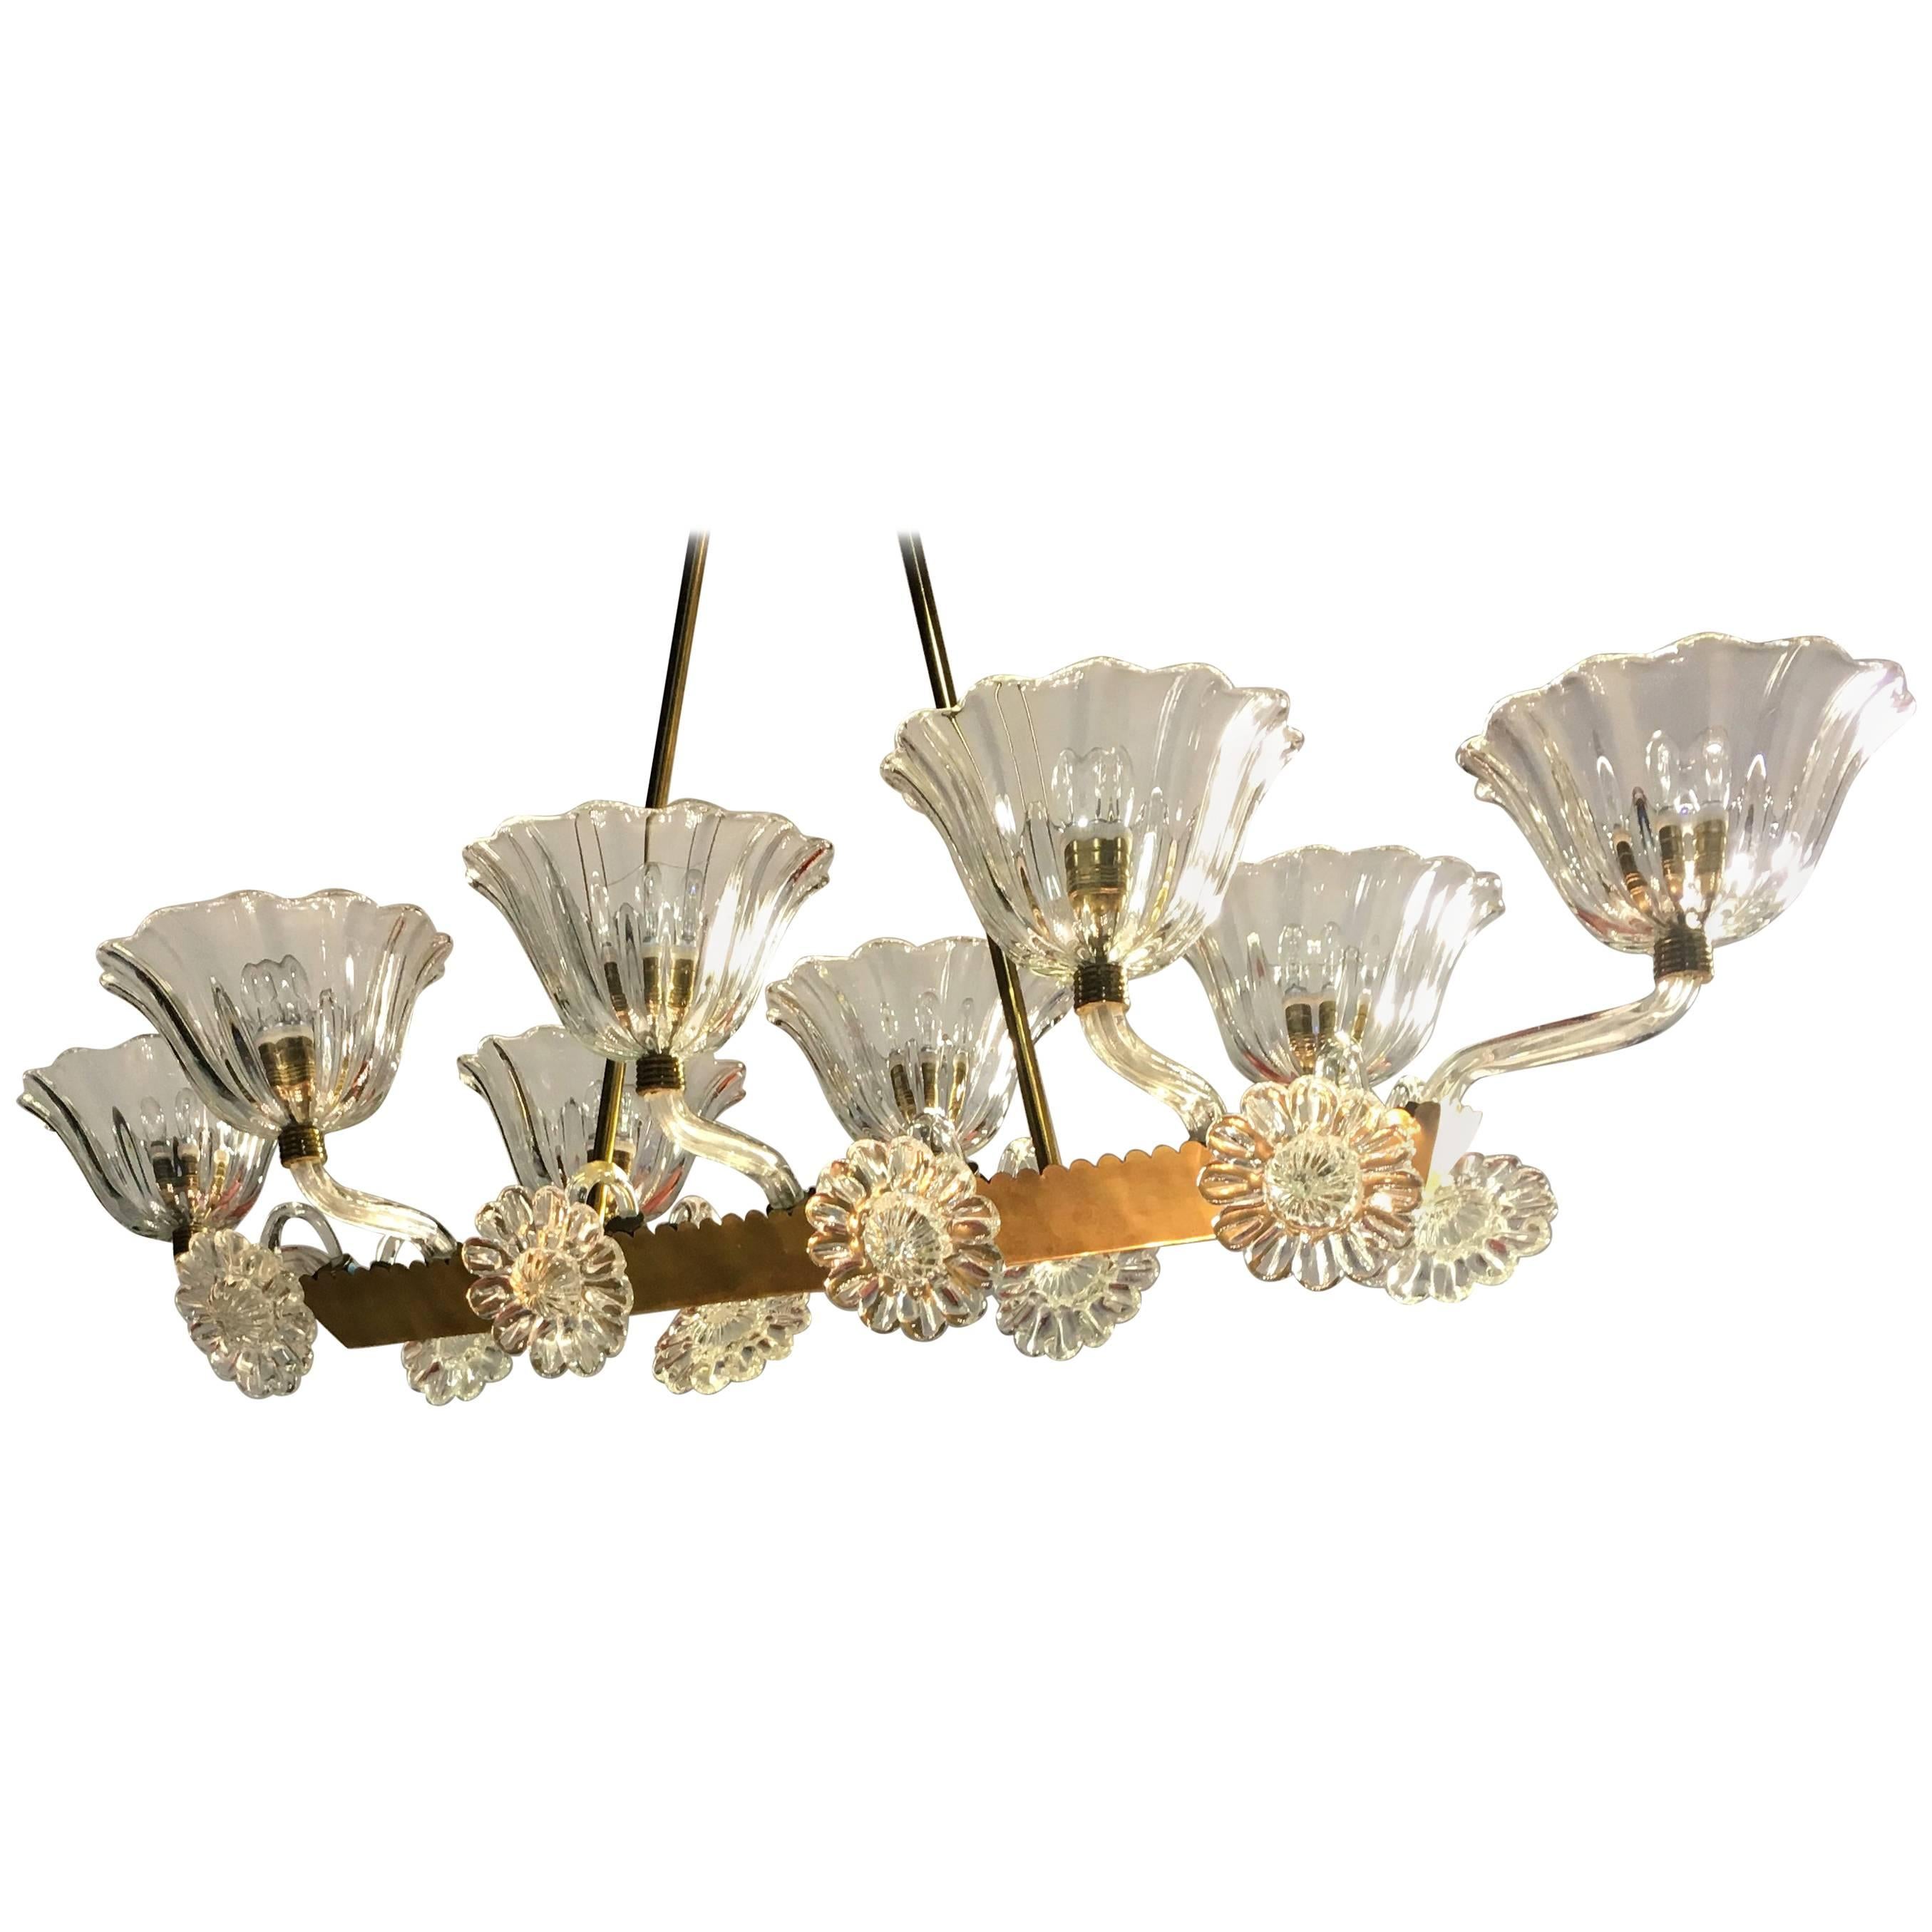 Amazing Liberty Chandelier by Ercole Barovier, Murano, 1940s For Sale